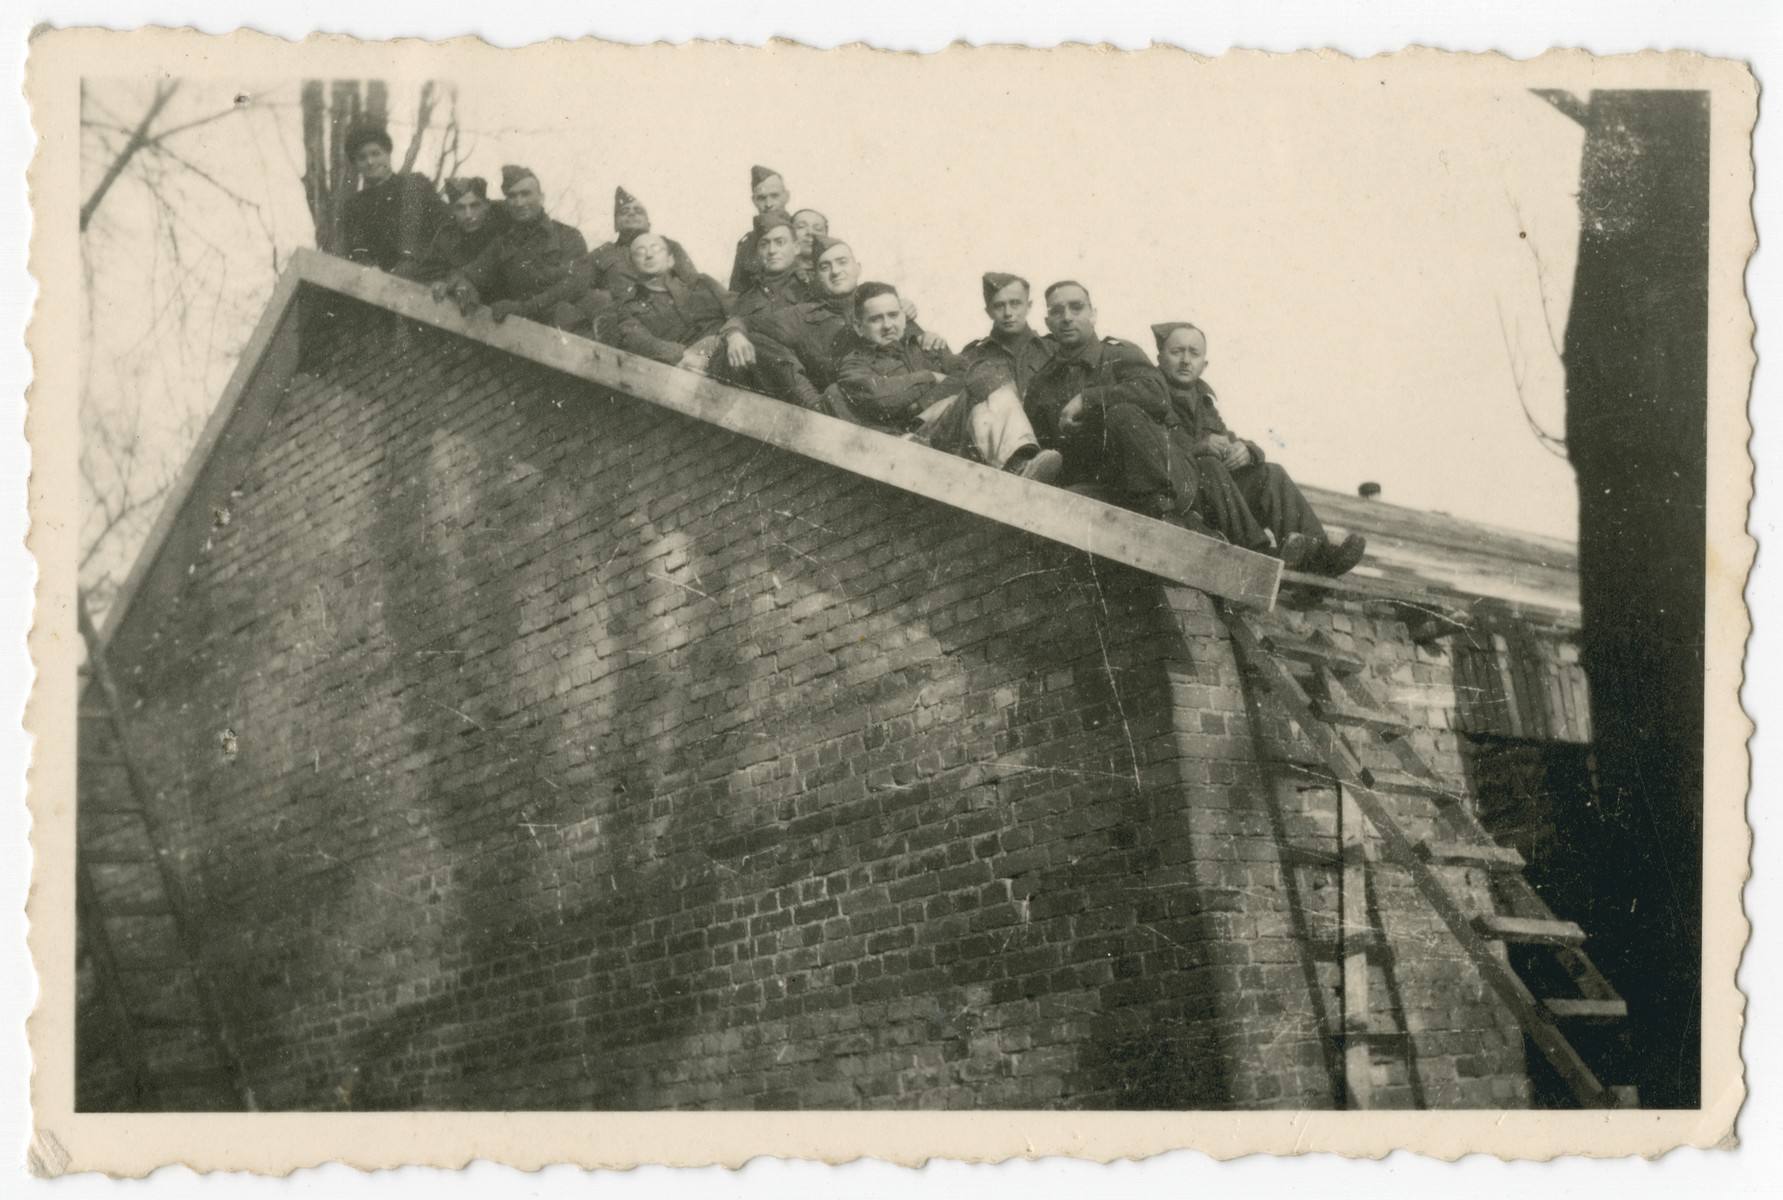 British POWs in Stalag IV A, Elsterhorst pose on the roof of a brick barrack.

Among those pictured is Erich de-Beer, a Germany Jew who immigrated illegally to Palesline and joined the British army.